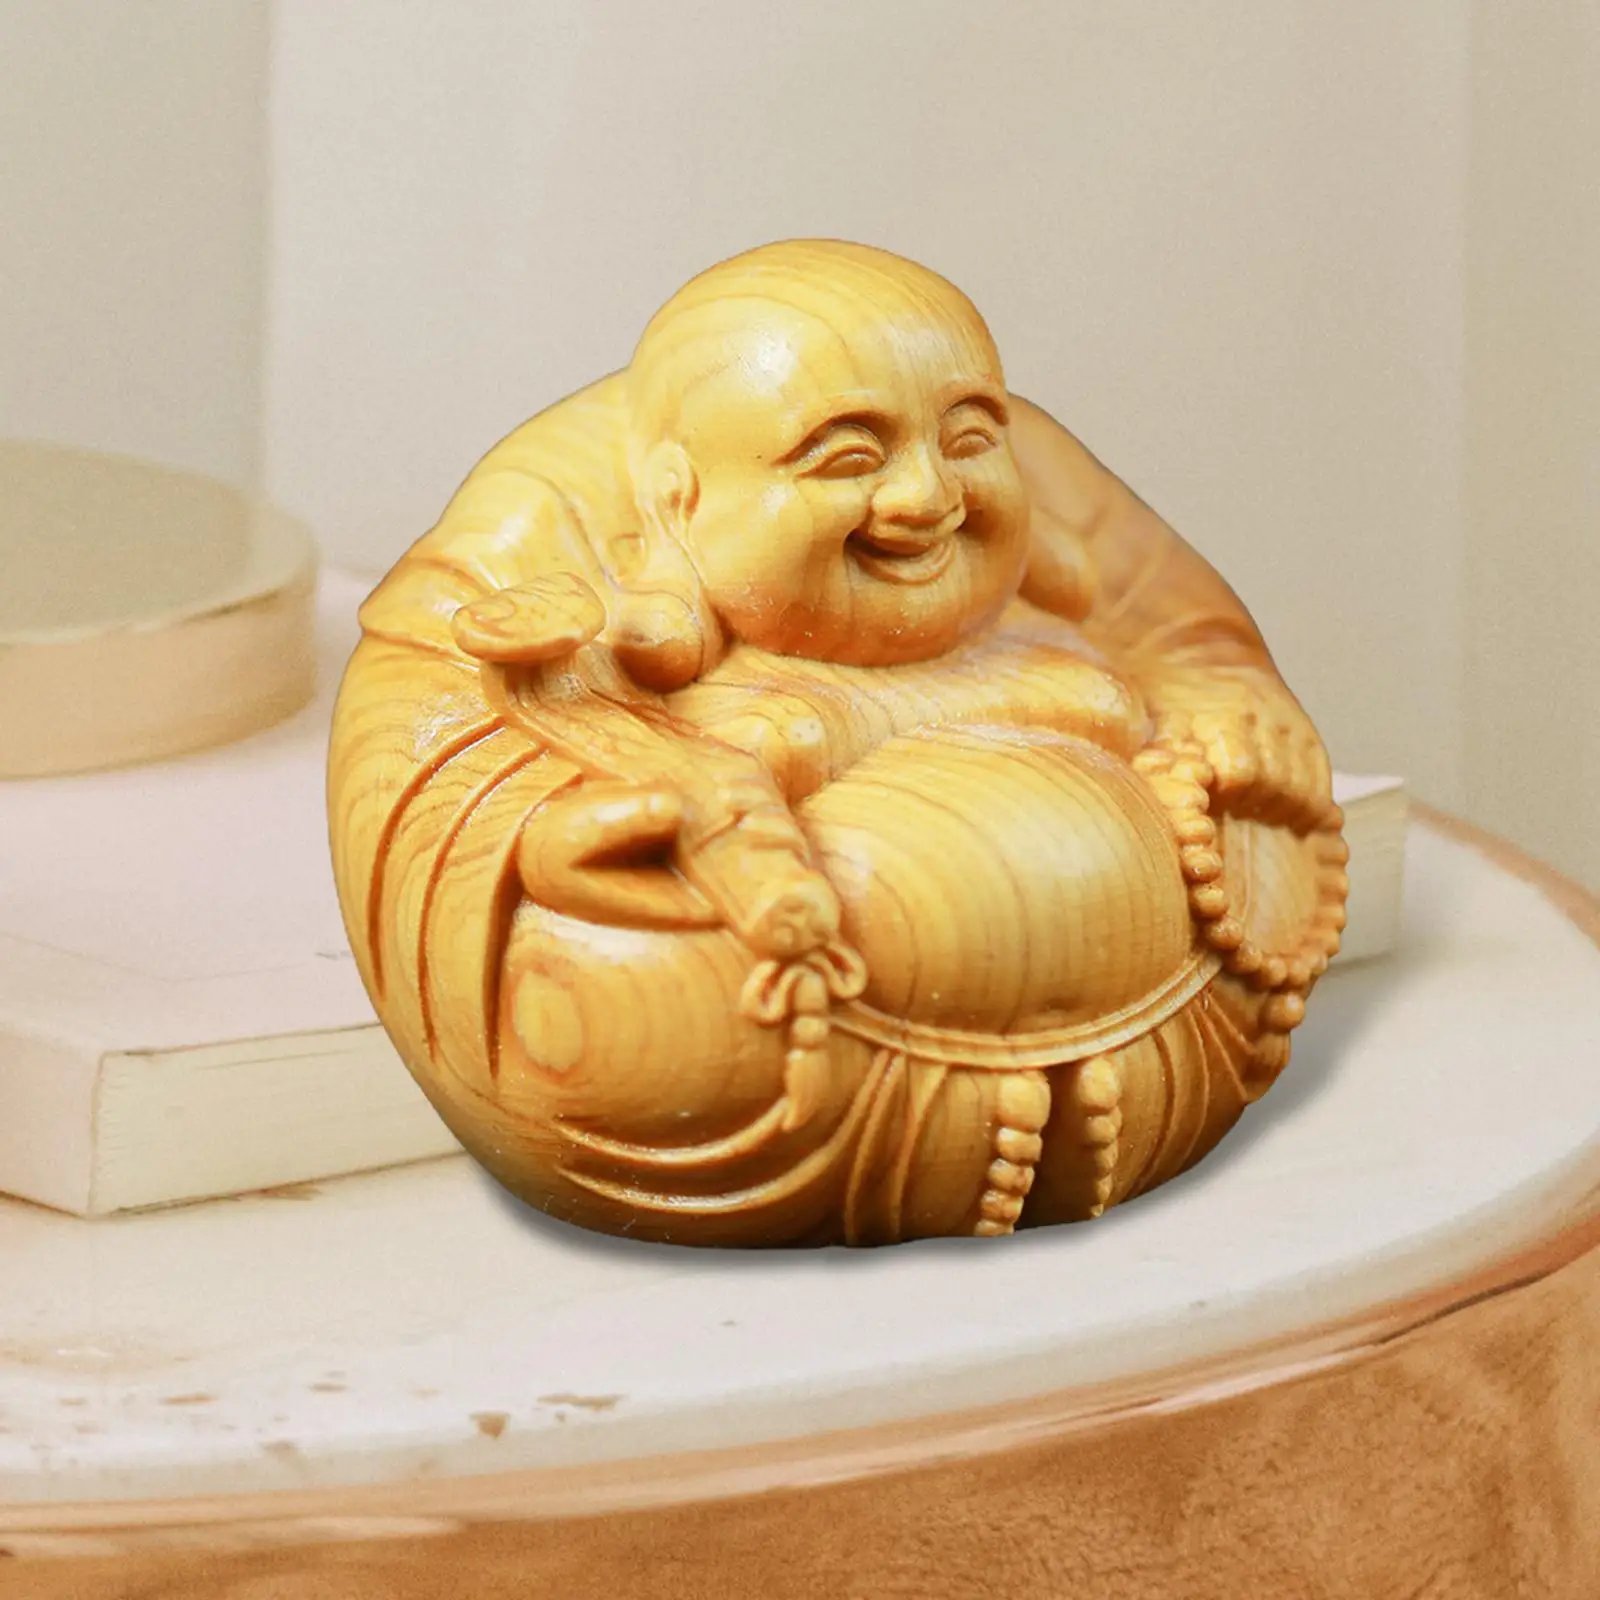 Wooden Buddha Statue Feng Shui Ornament Figurine for Home Cabinet Decor